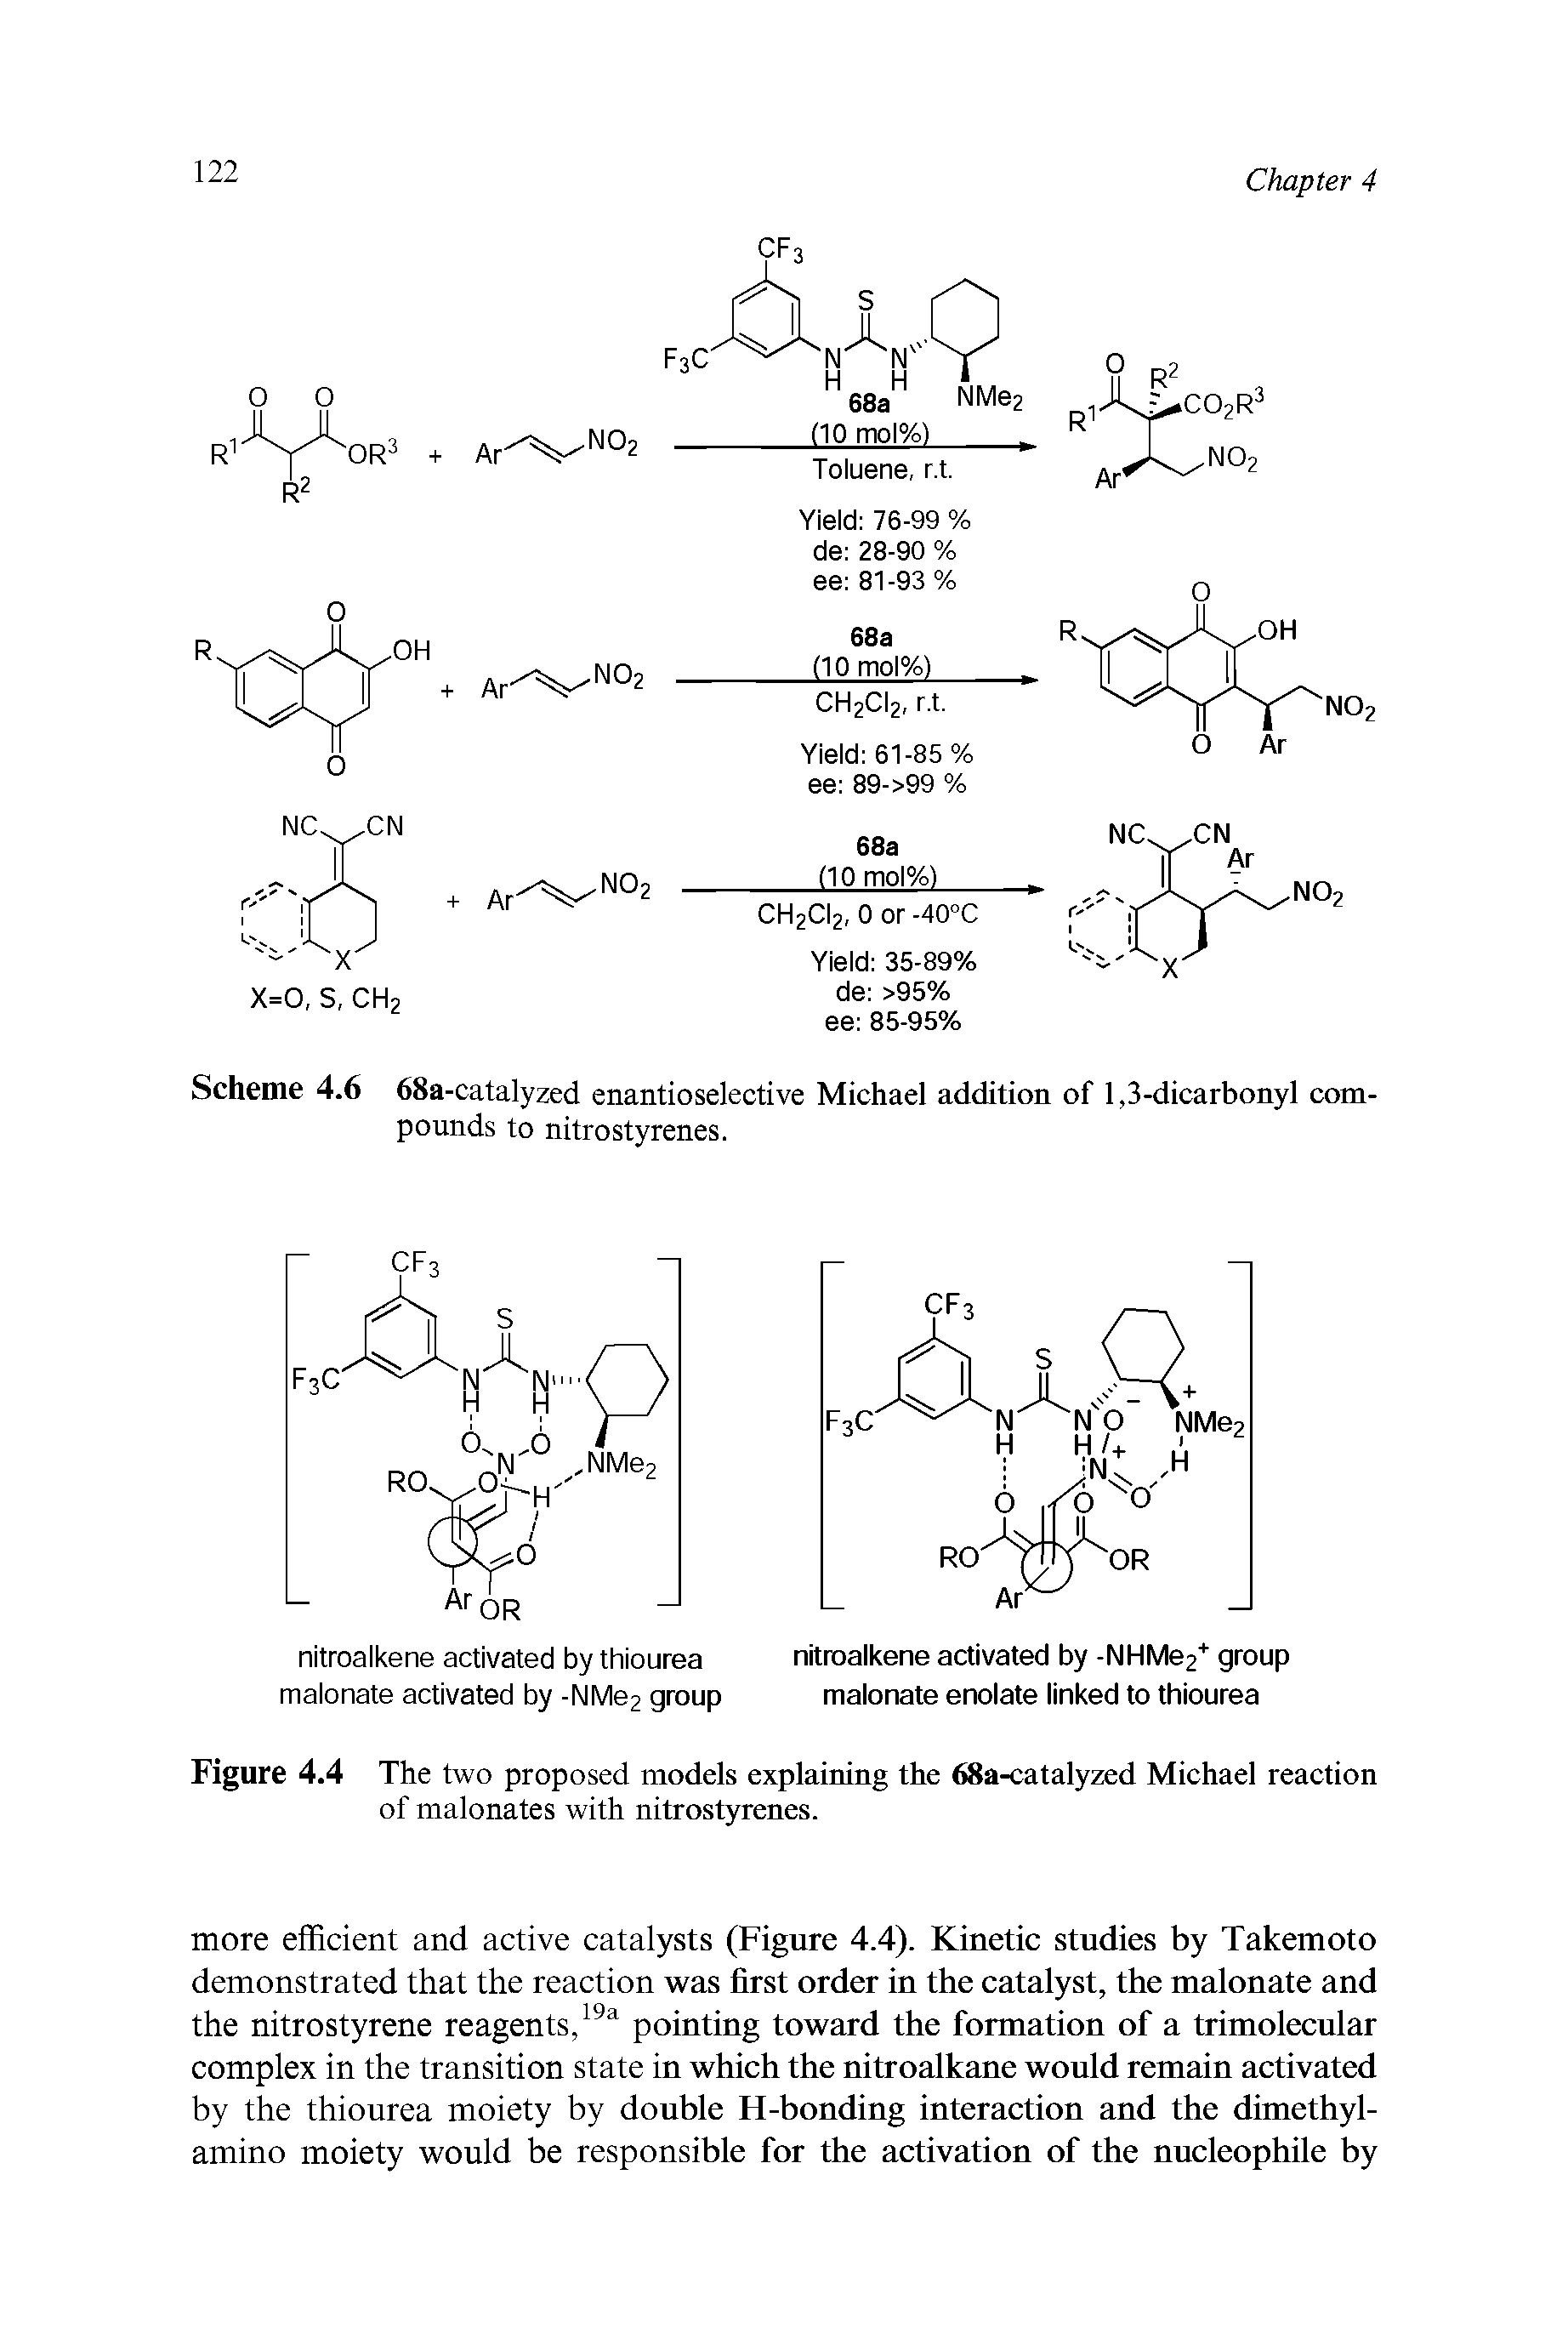 Figure 4.4 The two proposed models explaining the 68a-catalyzed Michael reaction of malonates with nitrostyrenes.